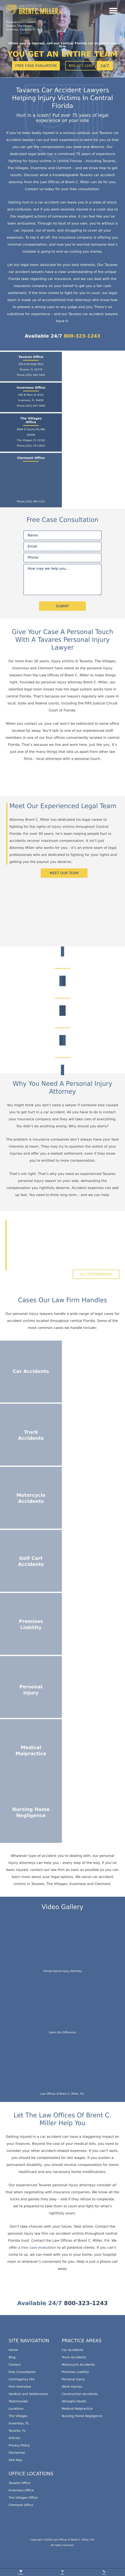 Law Offices of Brent C. Miller, P.A. - Tavares FL Lawyers